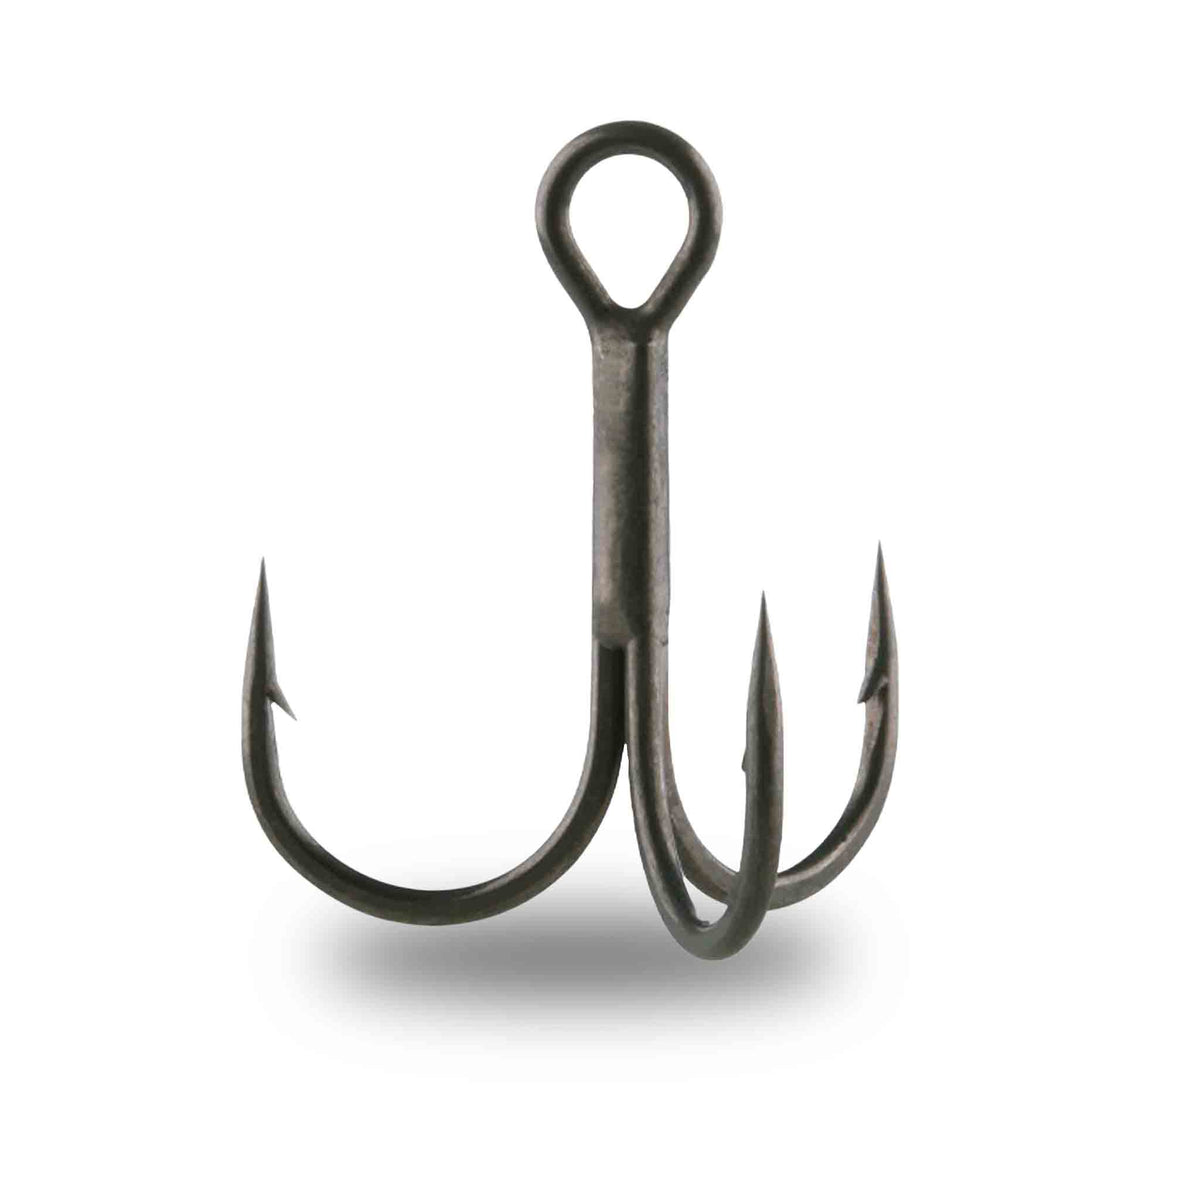 View of Hooks BKK Spear-21 SS Treble Hooks available at EZOKO Pike and Musky Shop